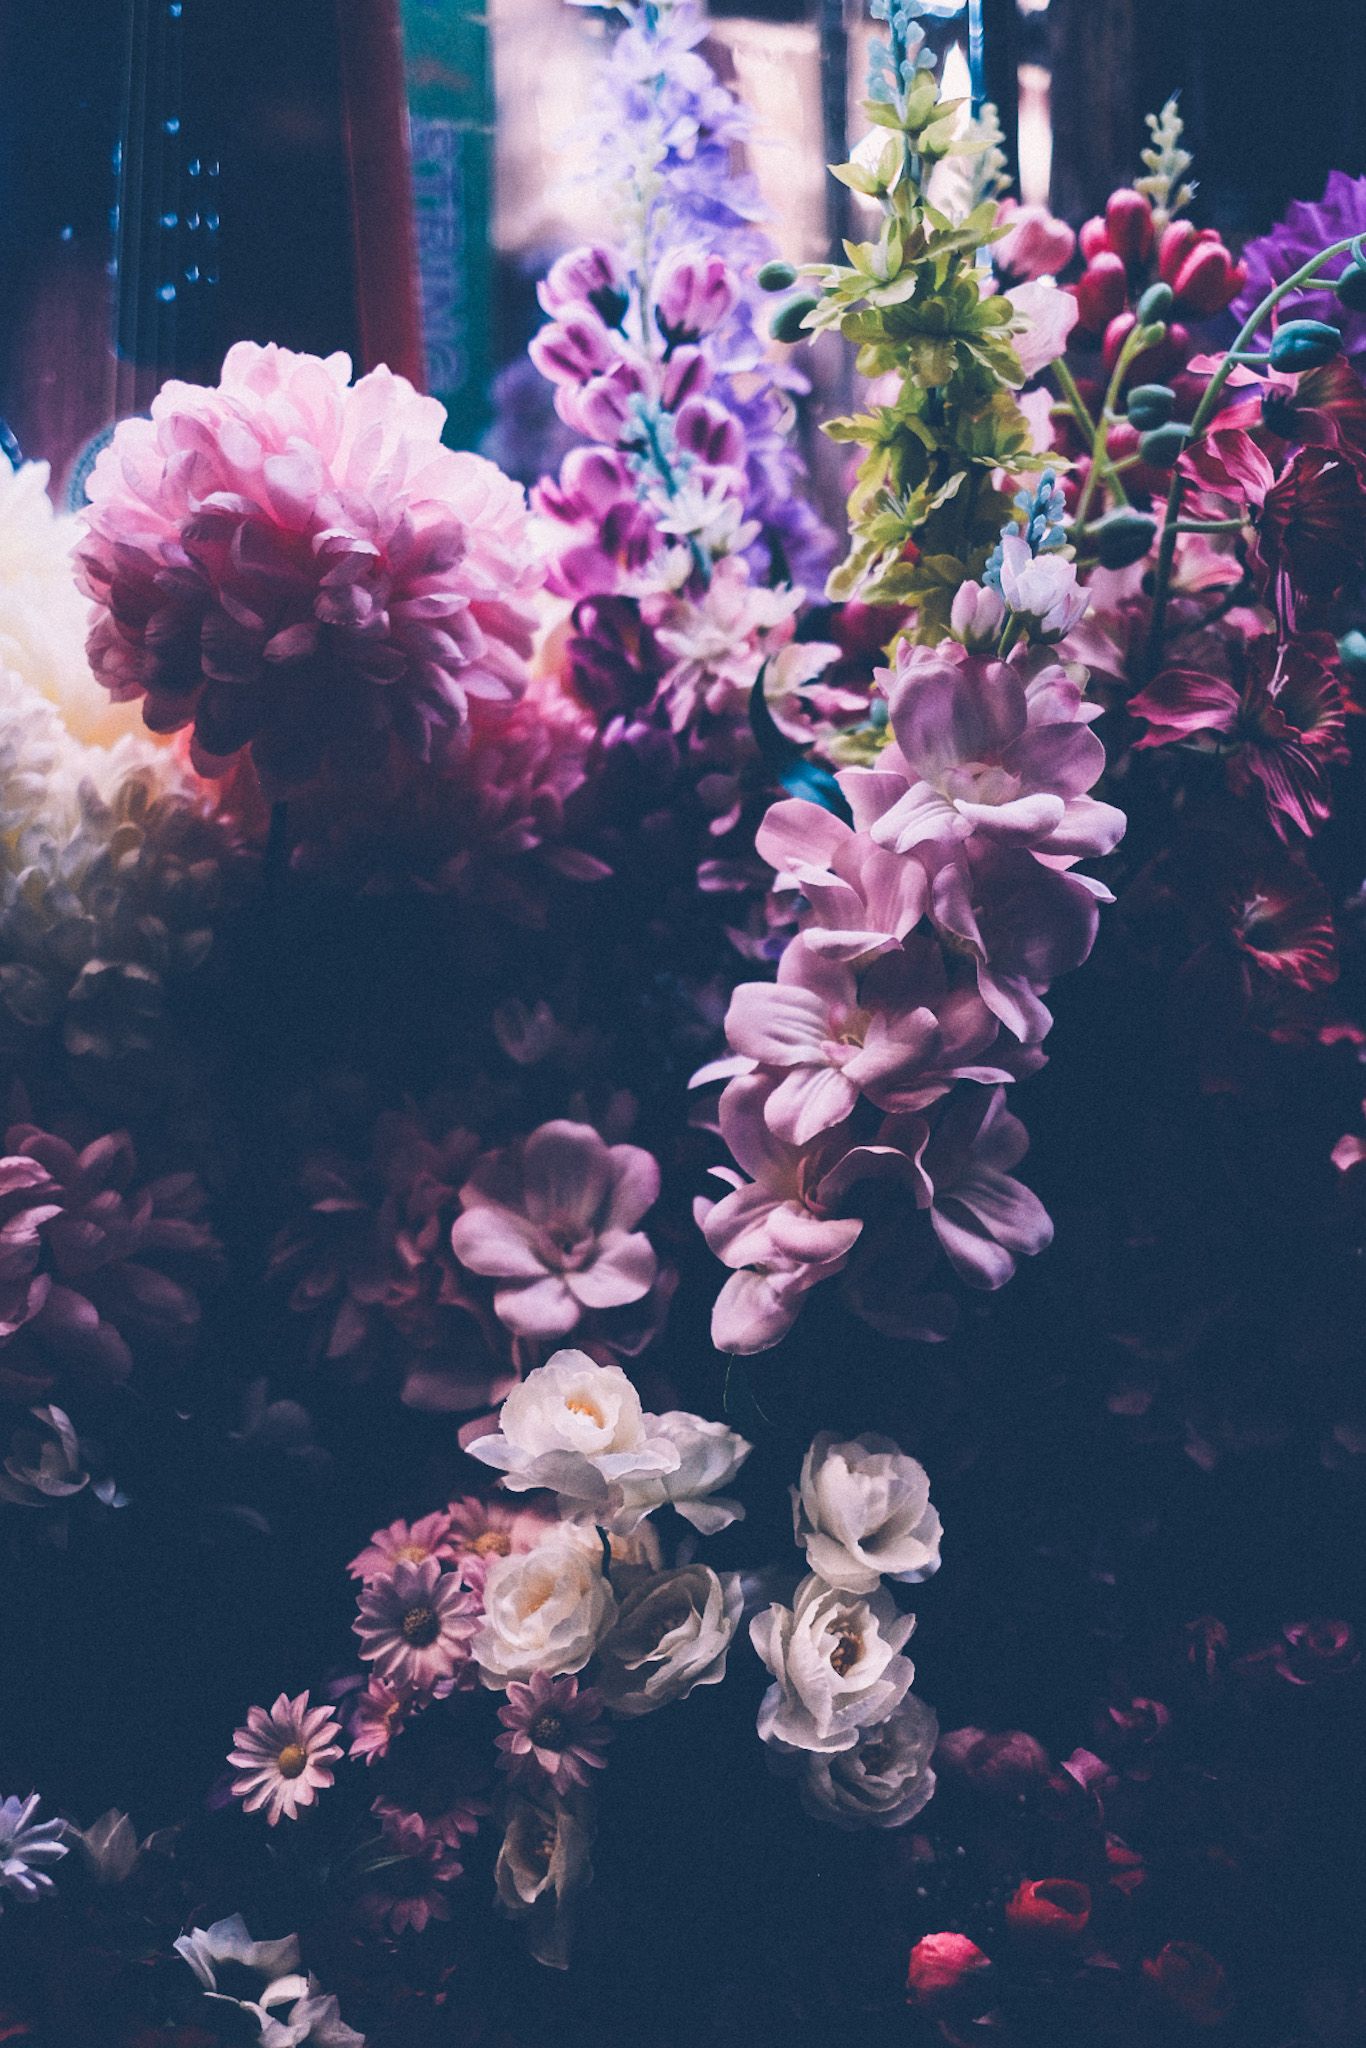 Fake flowers in colors of pink and purple and milky white show under fluorescent night lighting.